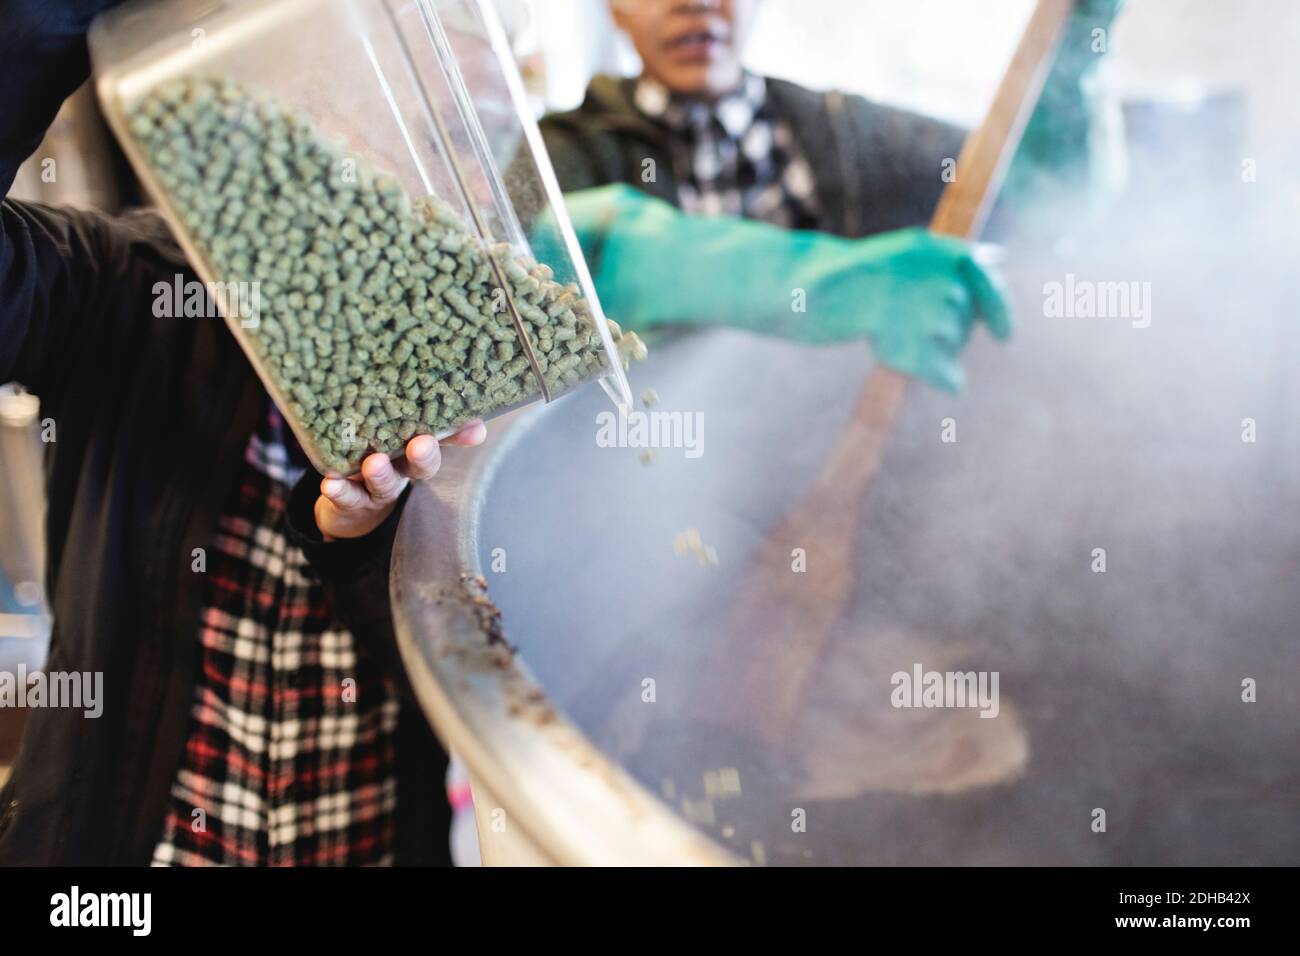 Woman pouring ingredients in container while assisting coworker at brewery Stock Photo